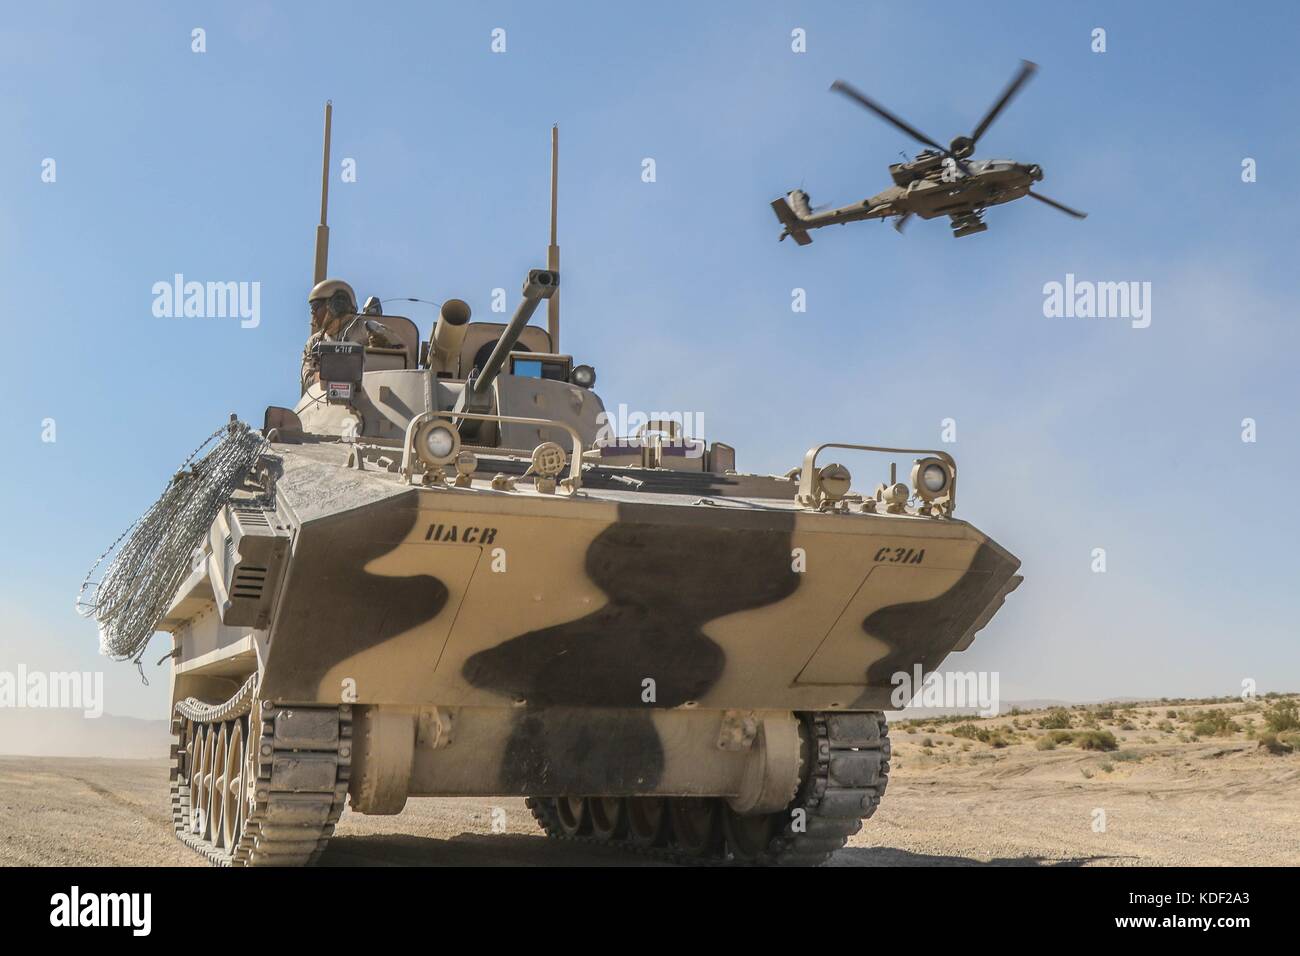 A U.S. Army AH-64 Apache attack helicopter flies over a Opposing Force Surrogate Vehicles designed to replicate Russian military armored vehicles during assault training near the John Wayne Foothills at the Fort Irwin National Training Center July 1, 2017 in Fort Irwin, California.   (photo by Austin Anyzeski via Planetpix) Stock Photo